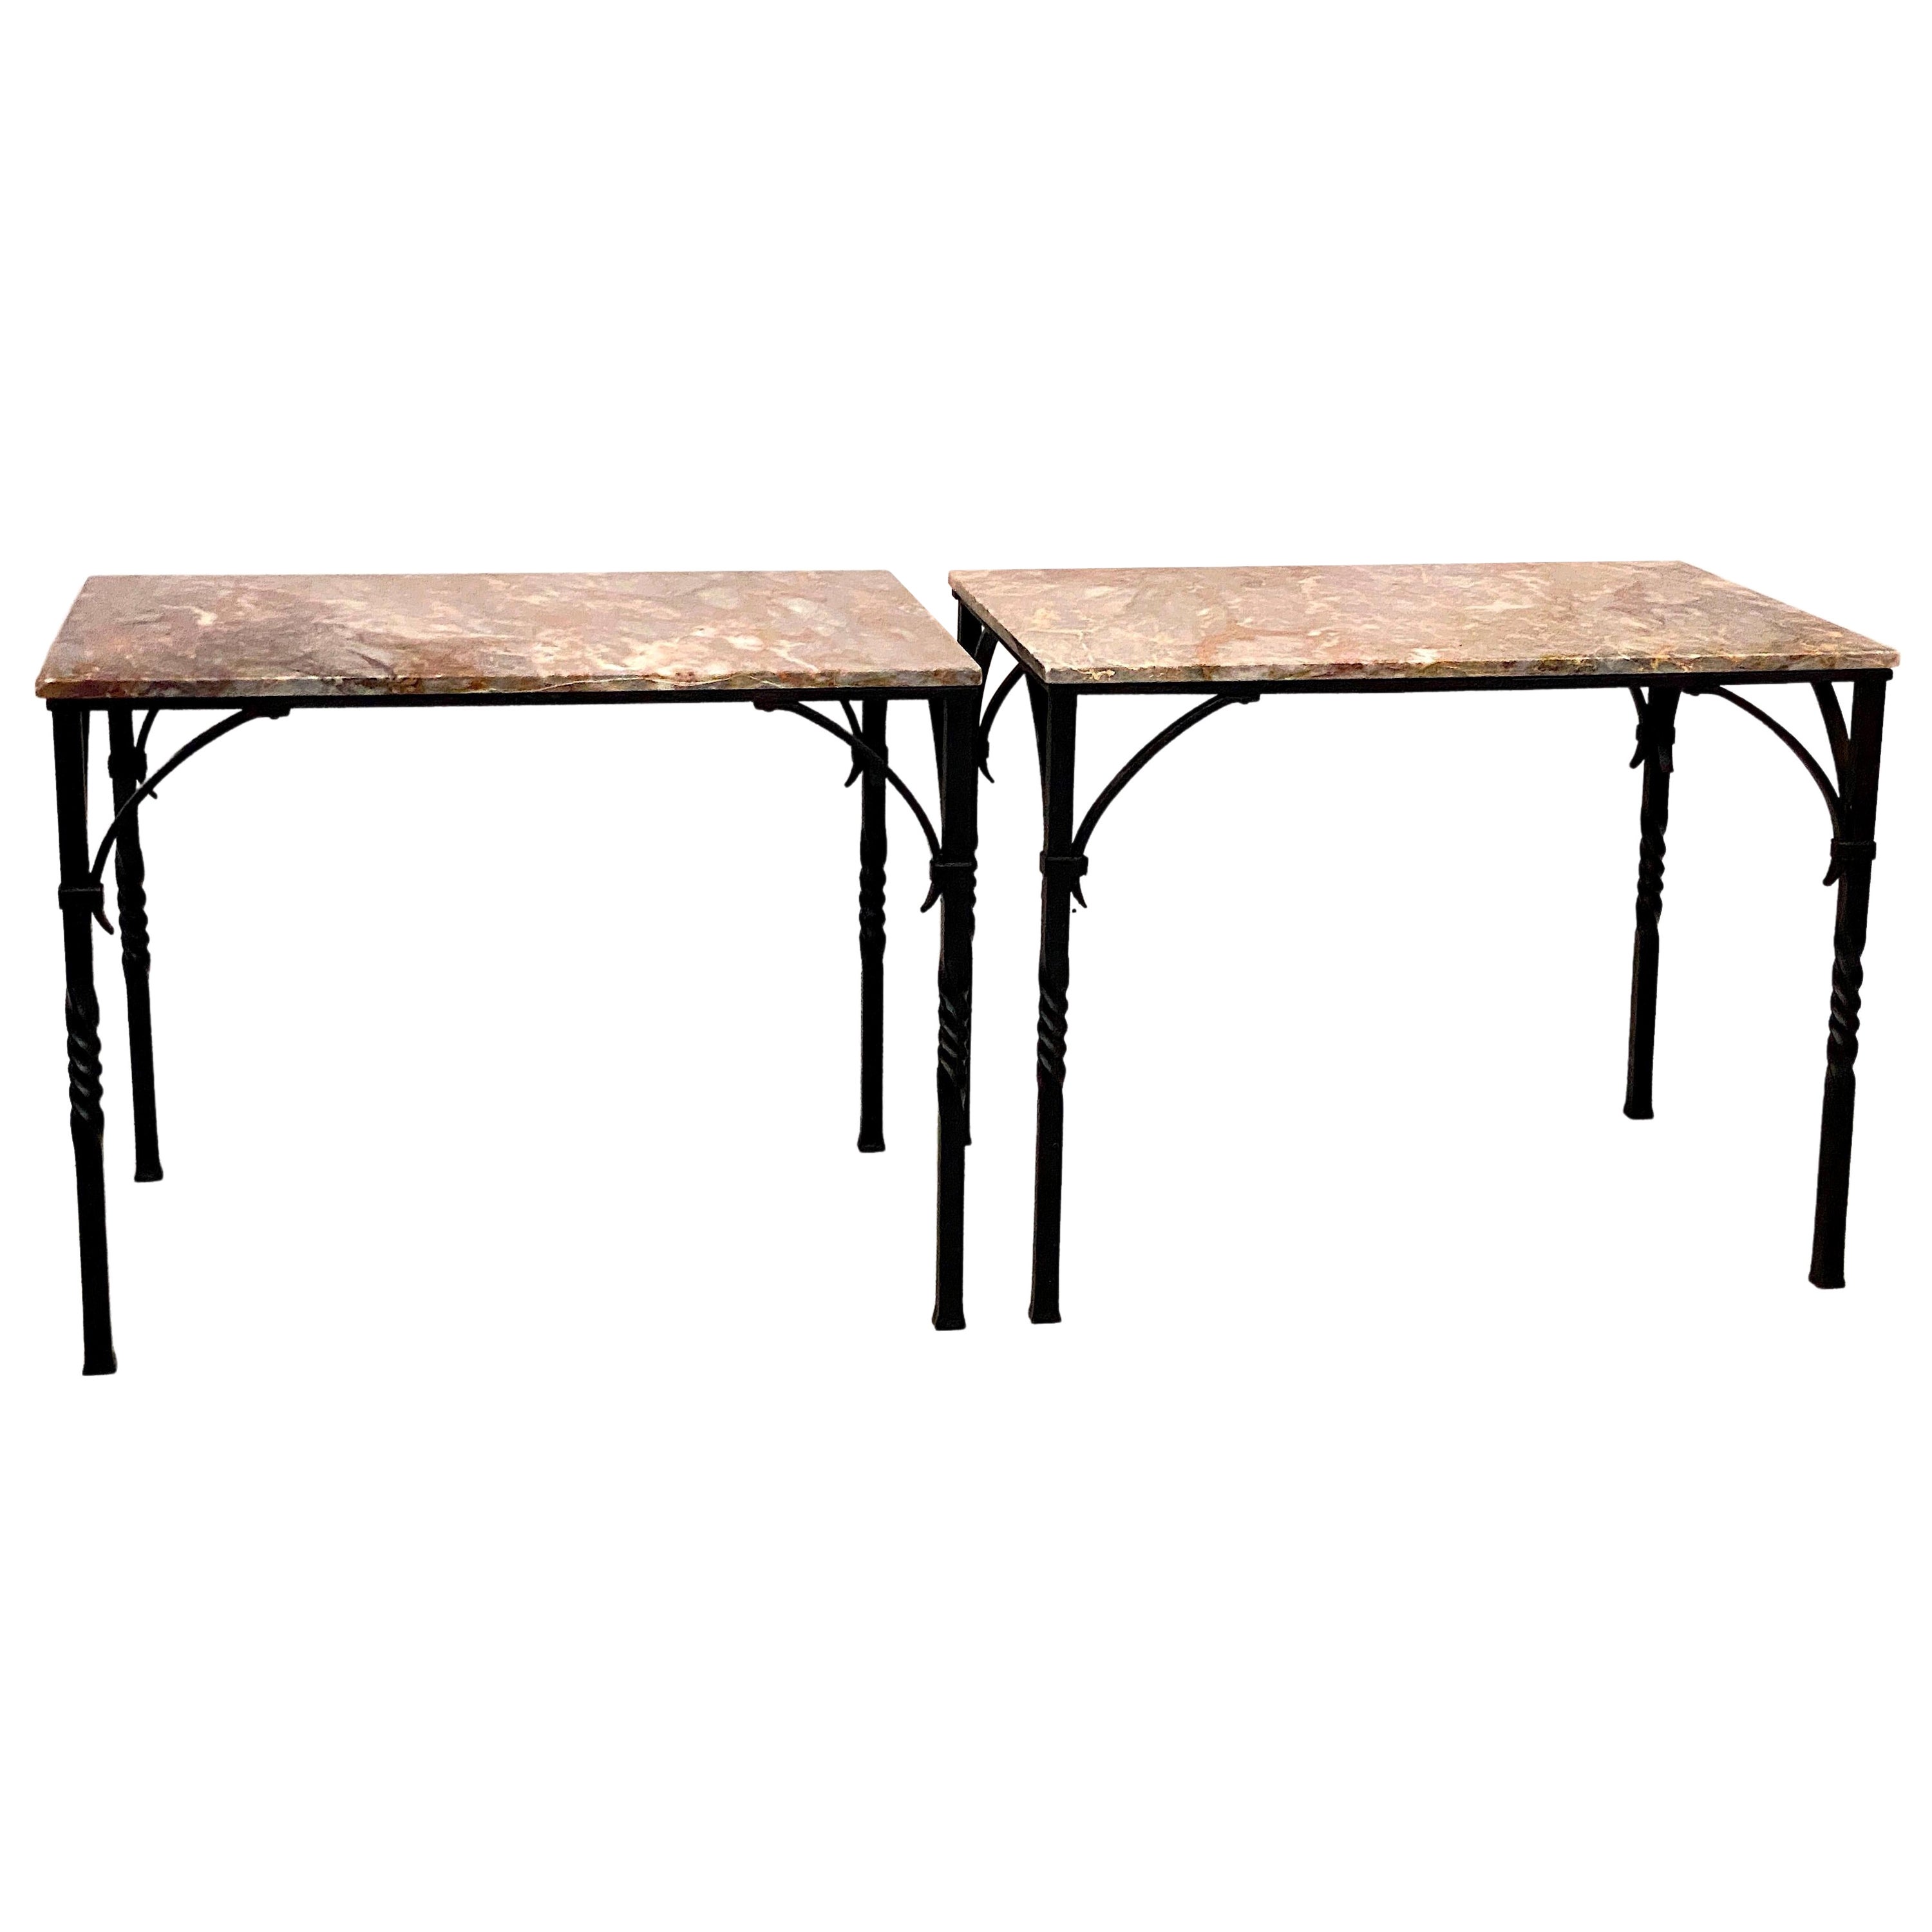 Pair of Addison Mizner Wrought Iron Console Tables